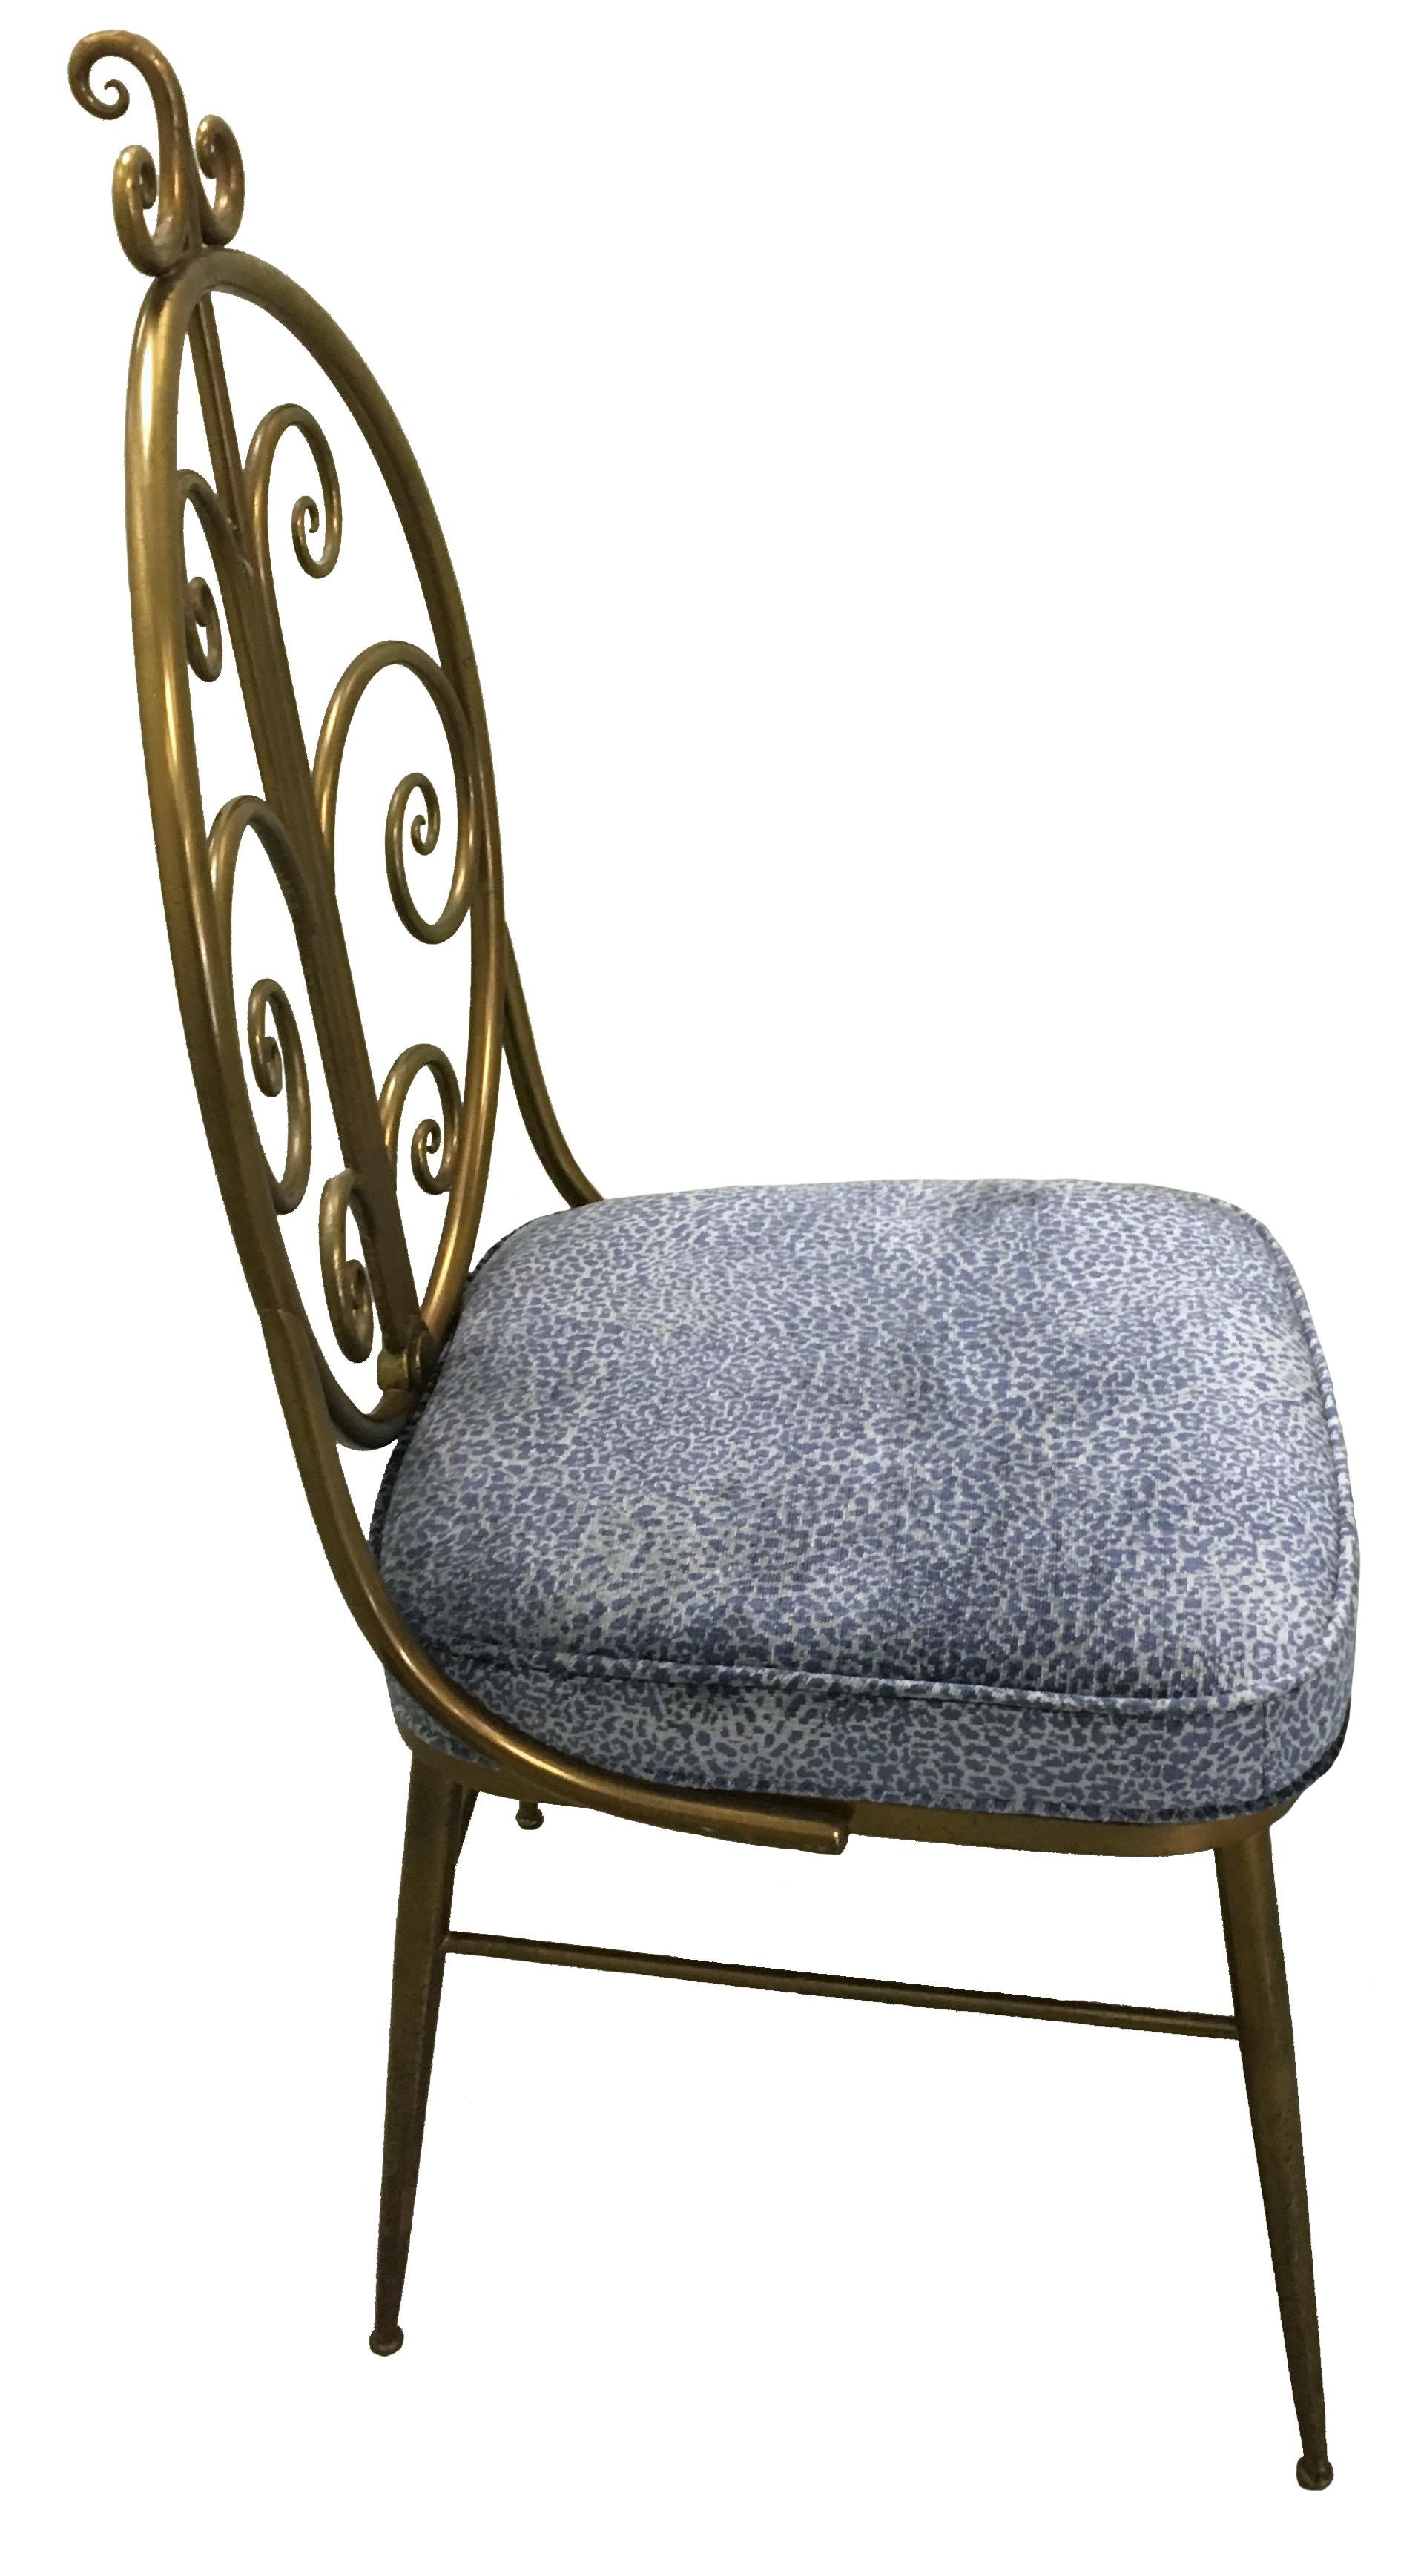 Mid-Century Italian Chiavari brass chair. Upholstered in Brunschwig & Fils “Panthere” printed velvet upholstery. Chair retains unpolished brass patina. Measures: Seat is 17.5